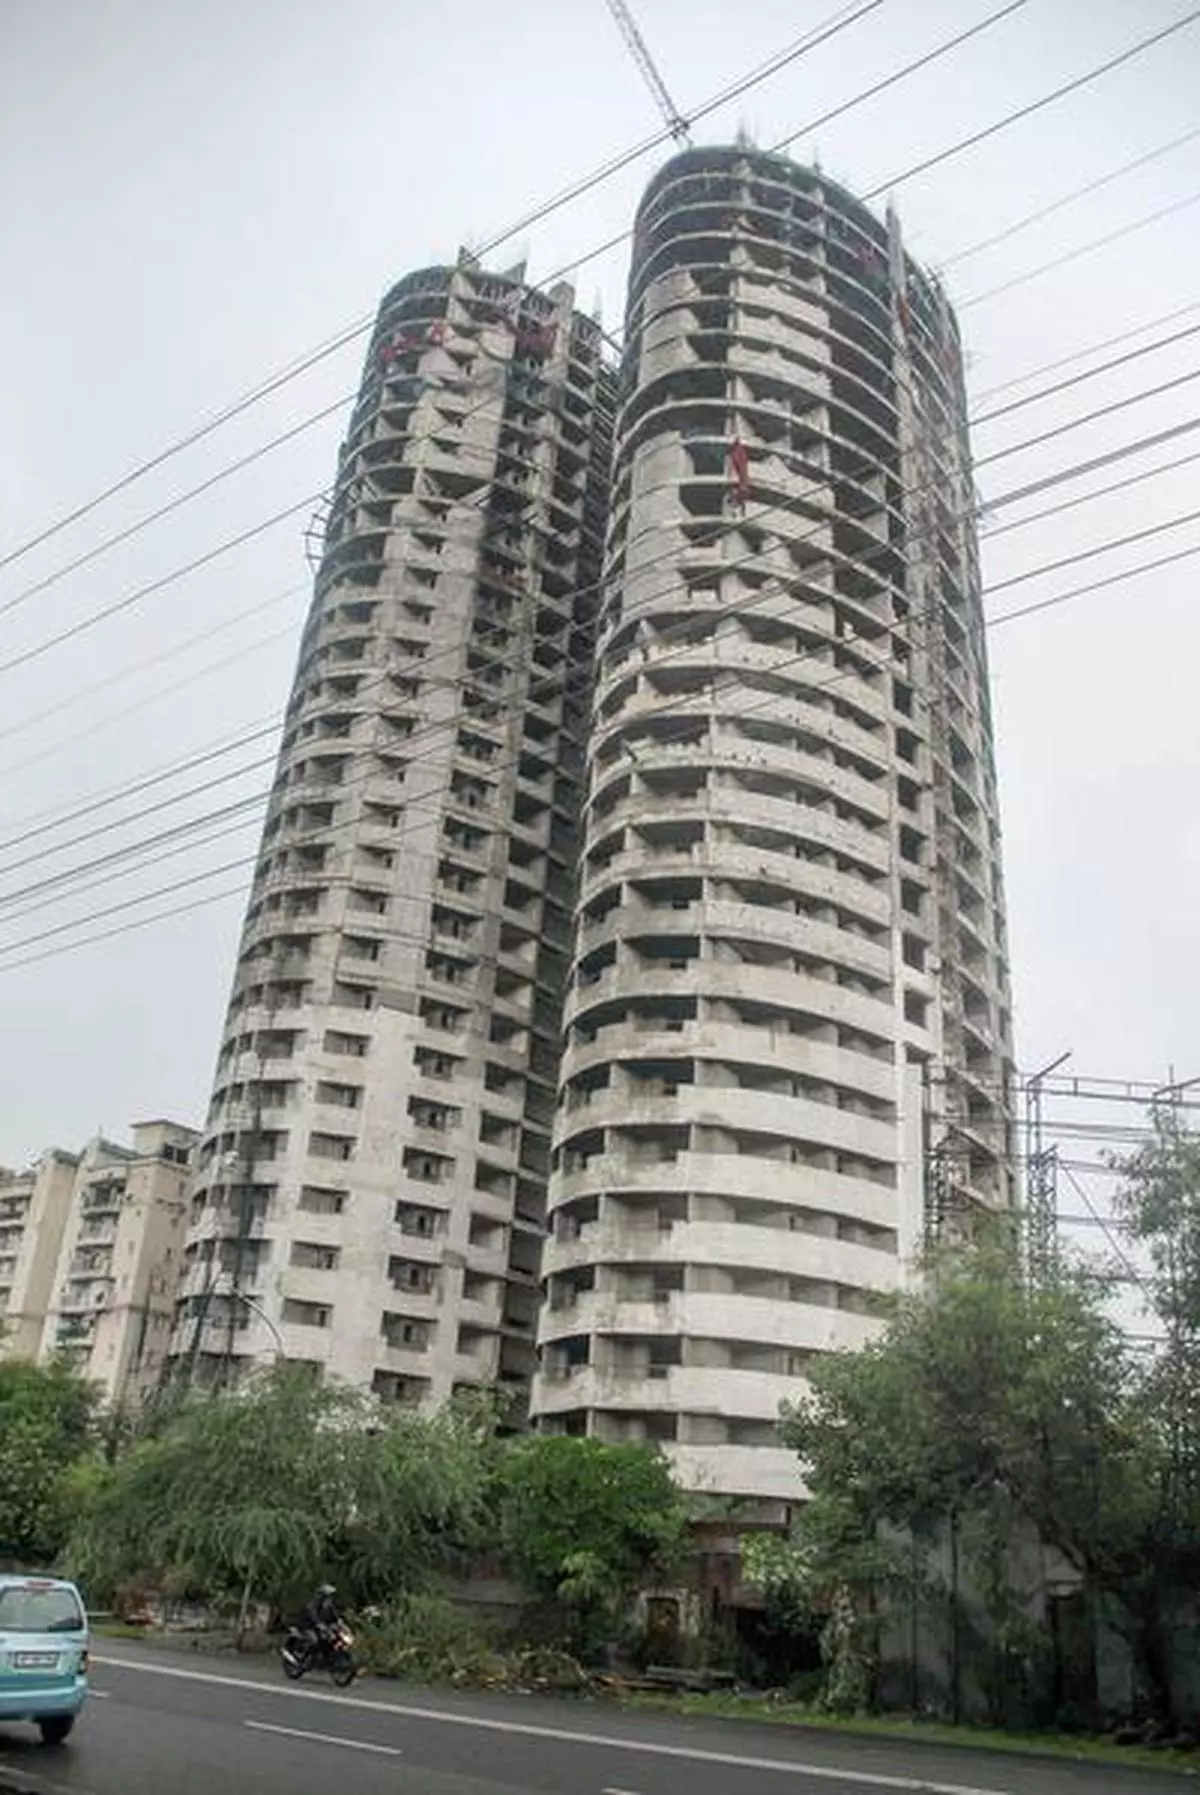 File picture of Supertech’s 40-storey twin towers in Noida. The Supreme Court has directed demolition of the towers for violation of norms